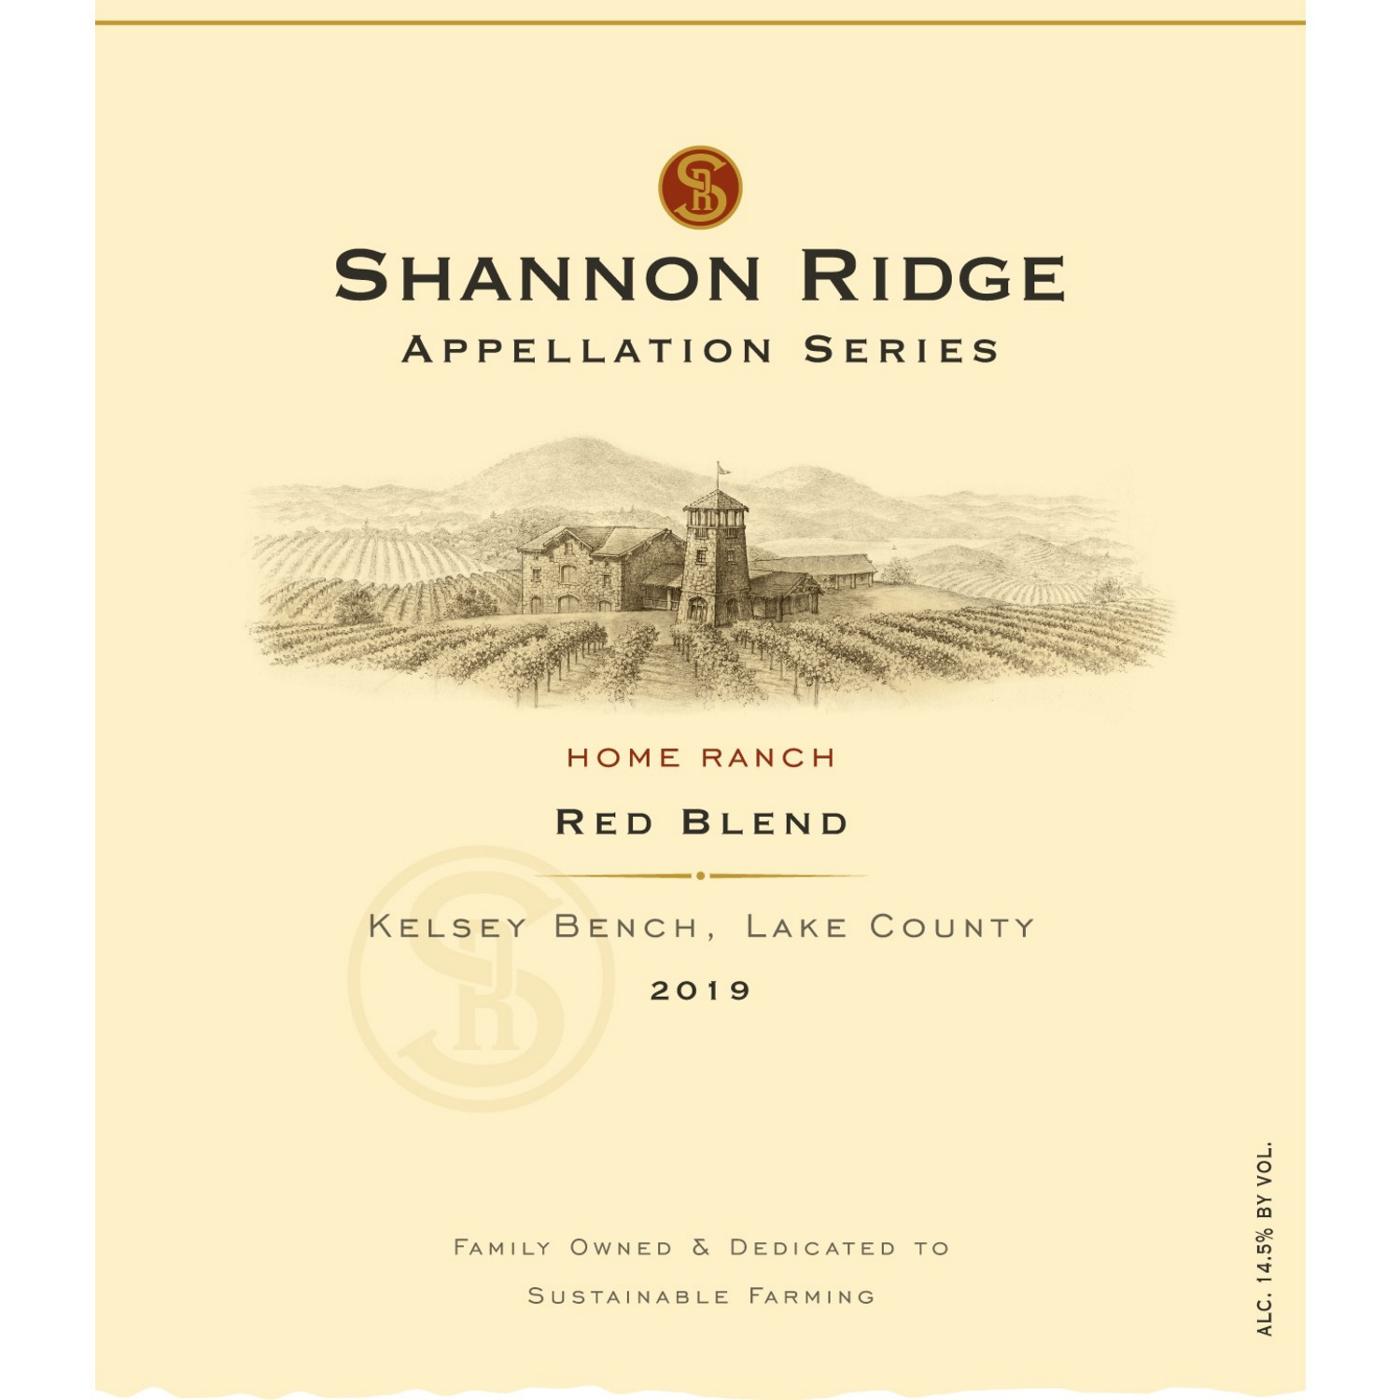 Shannon Ridge Home Ranch Red Blend; image 2 of 3